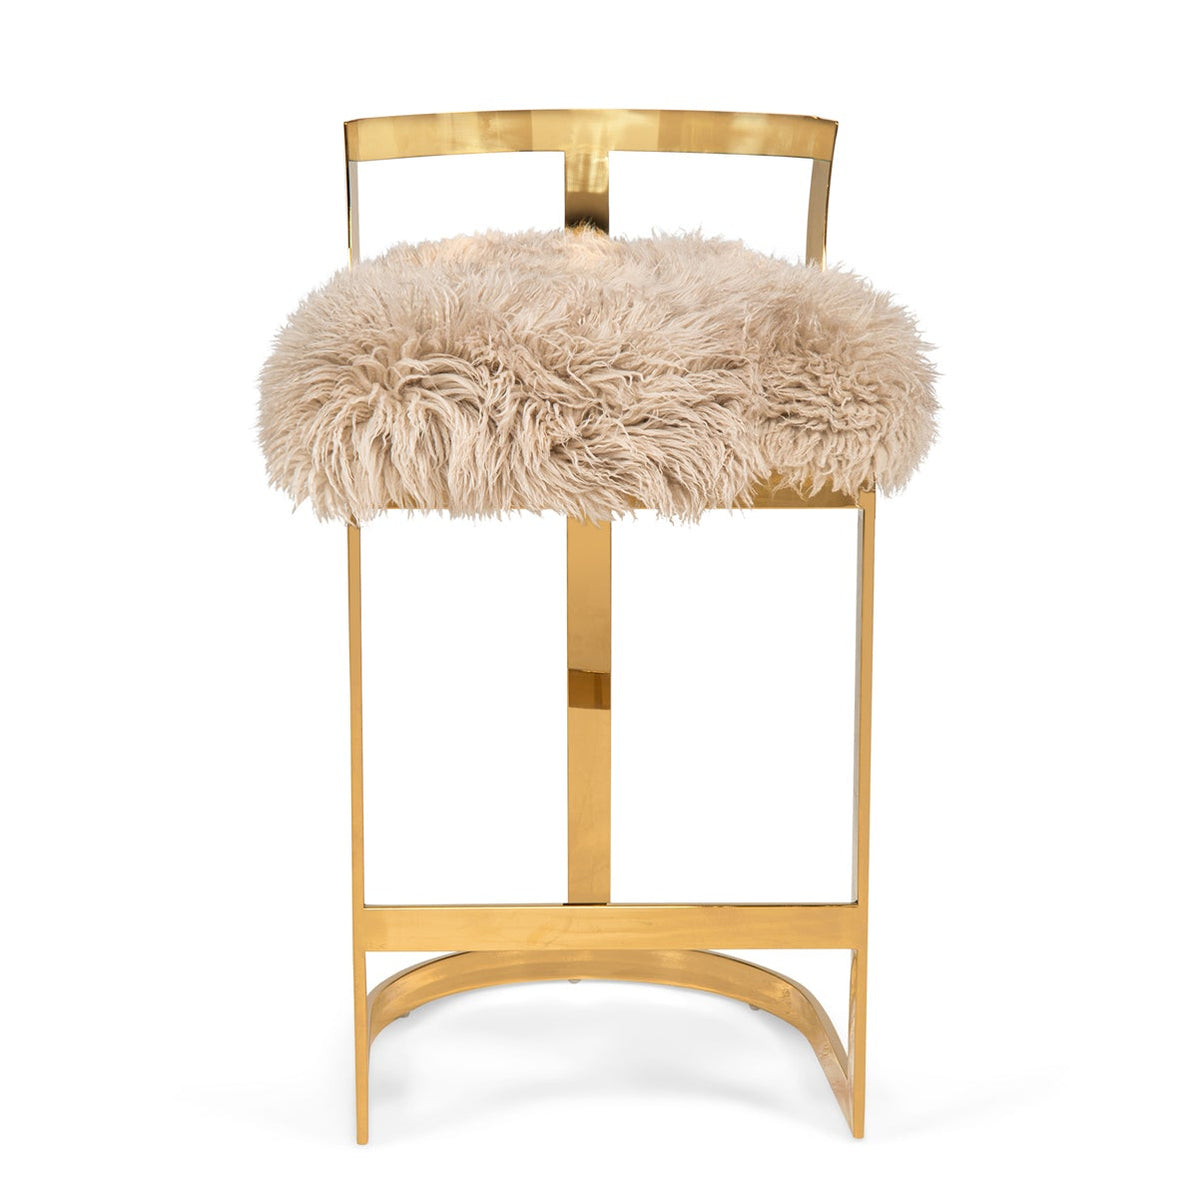 Madrid Bar and Counter Stool in Sheepskin